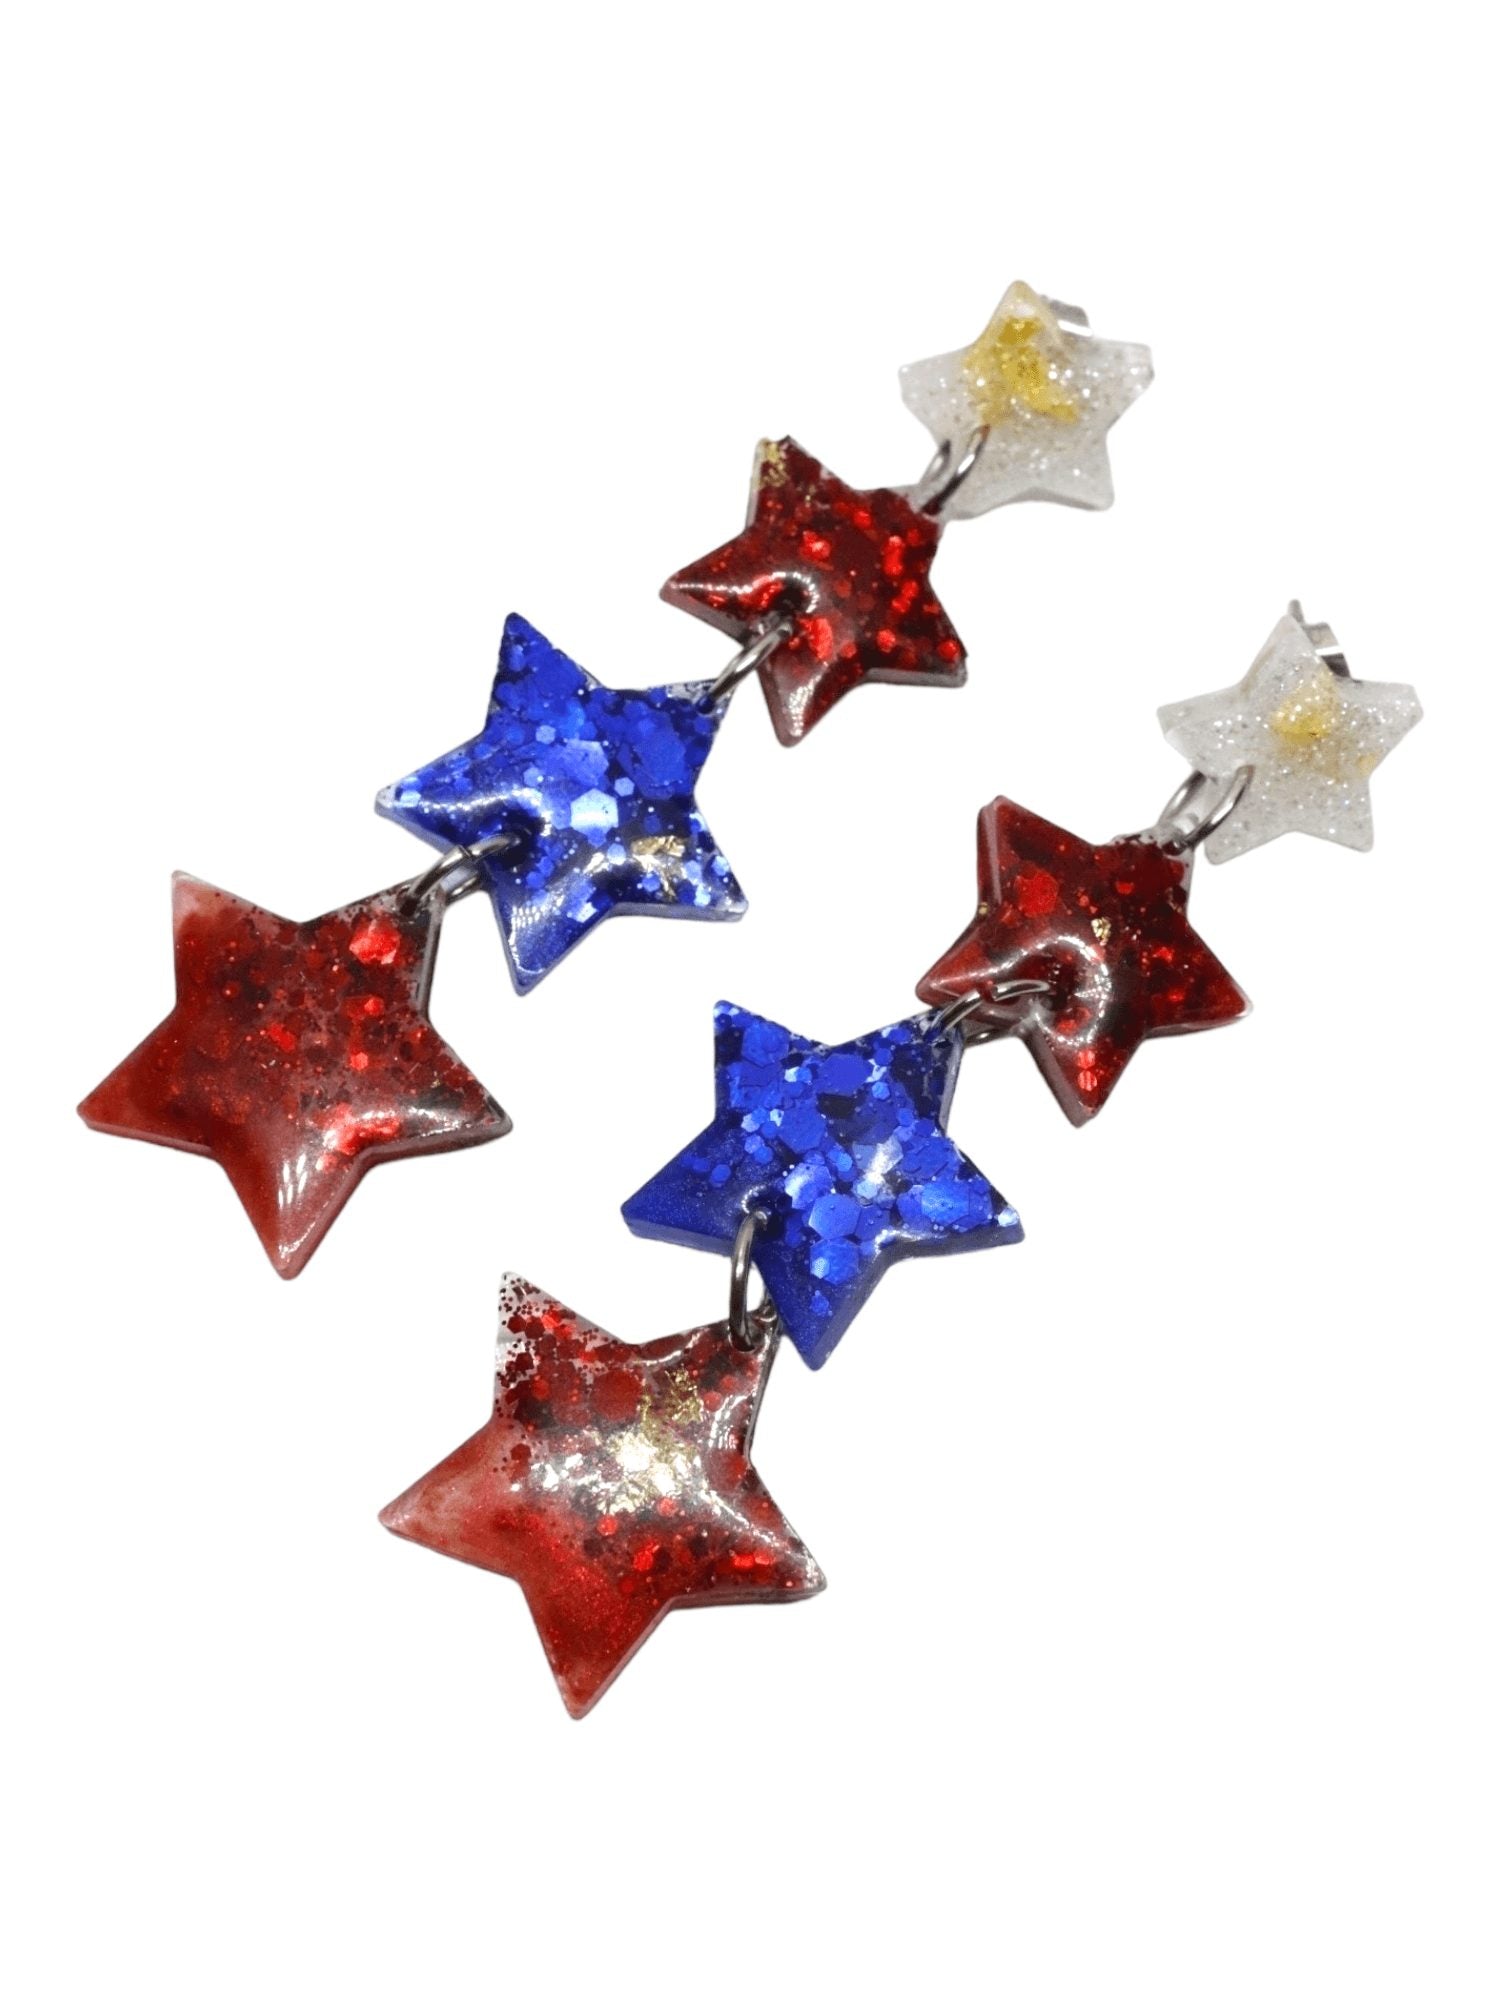 long-patriotic-star-earrings---hypoallergenic-resin-star-earrings---red-white-and-blue-jewelry---kaleidoscopes-and-polka-dots